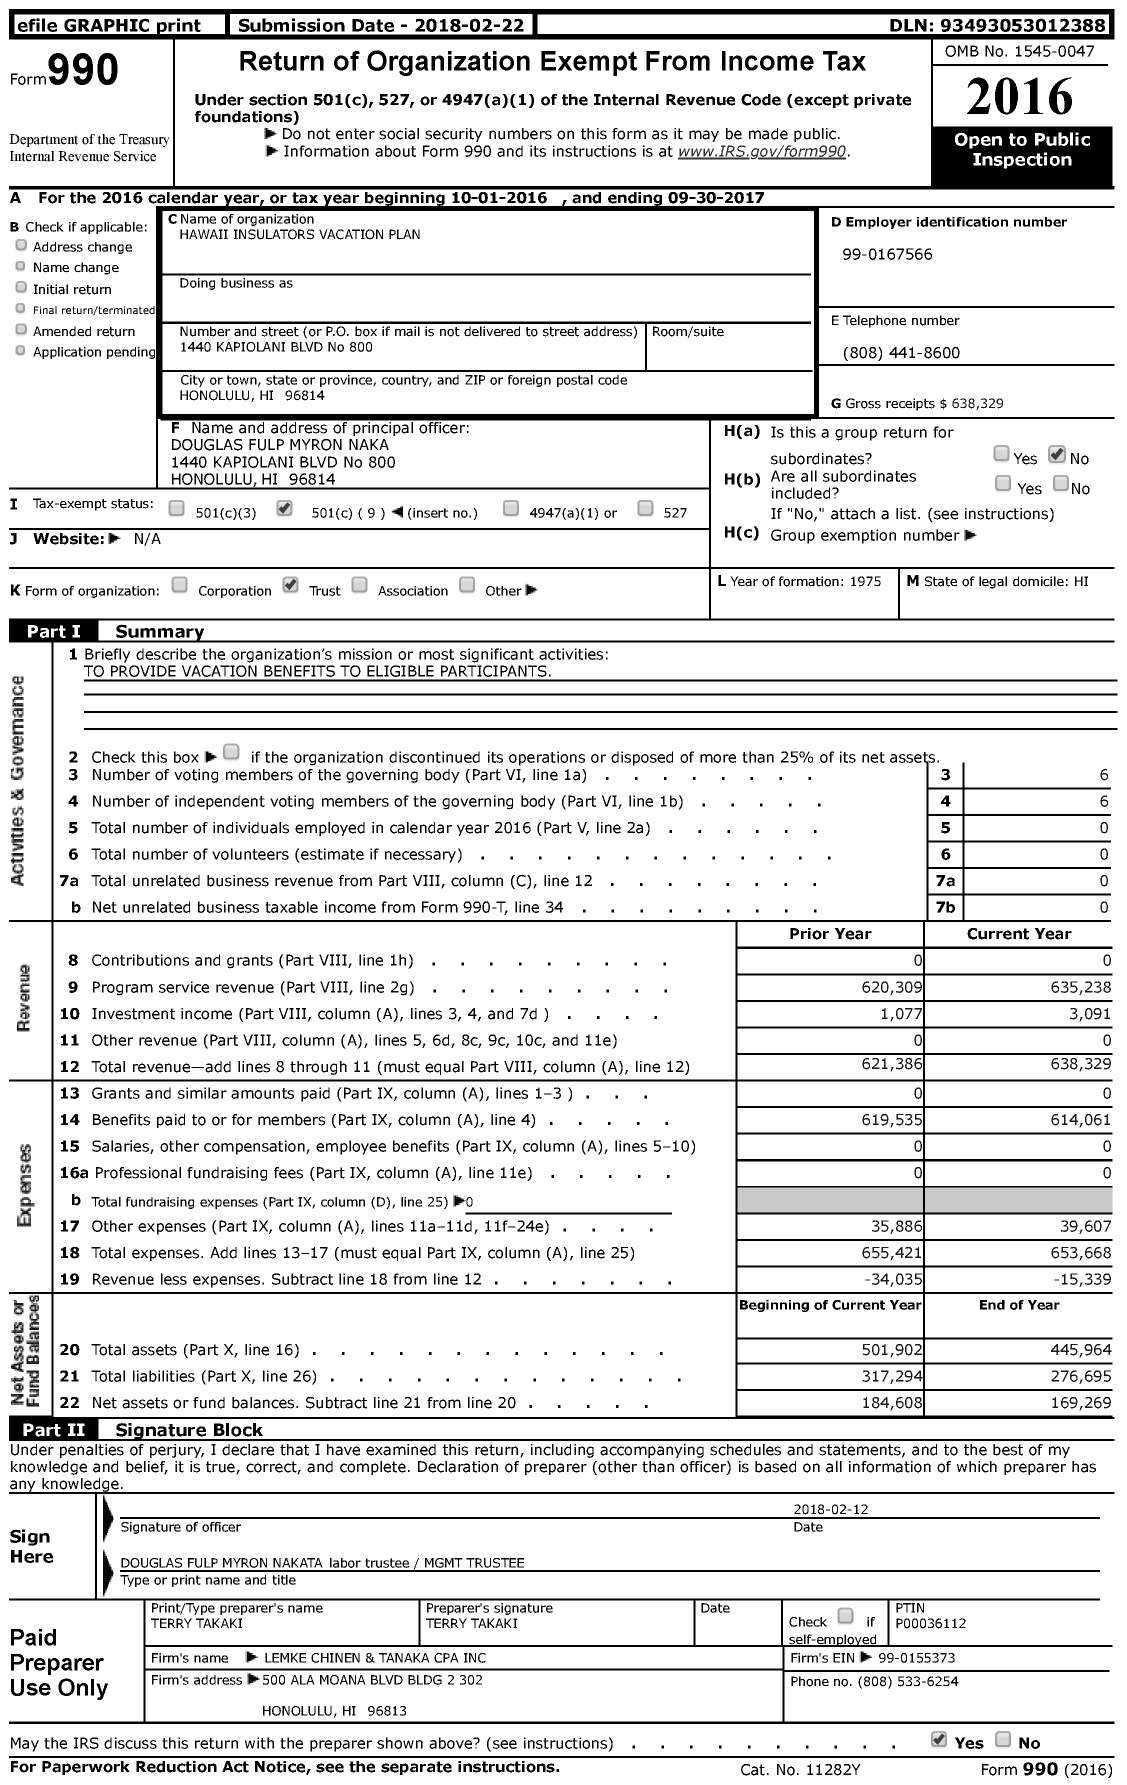 Image of first page of 2016 Form 990 for Hawaii Insulators Vacation Plan